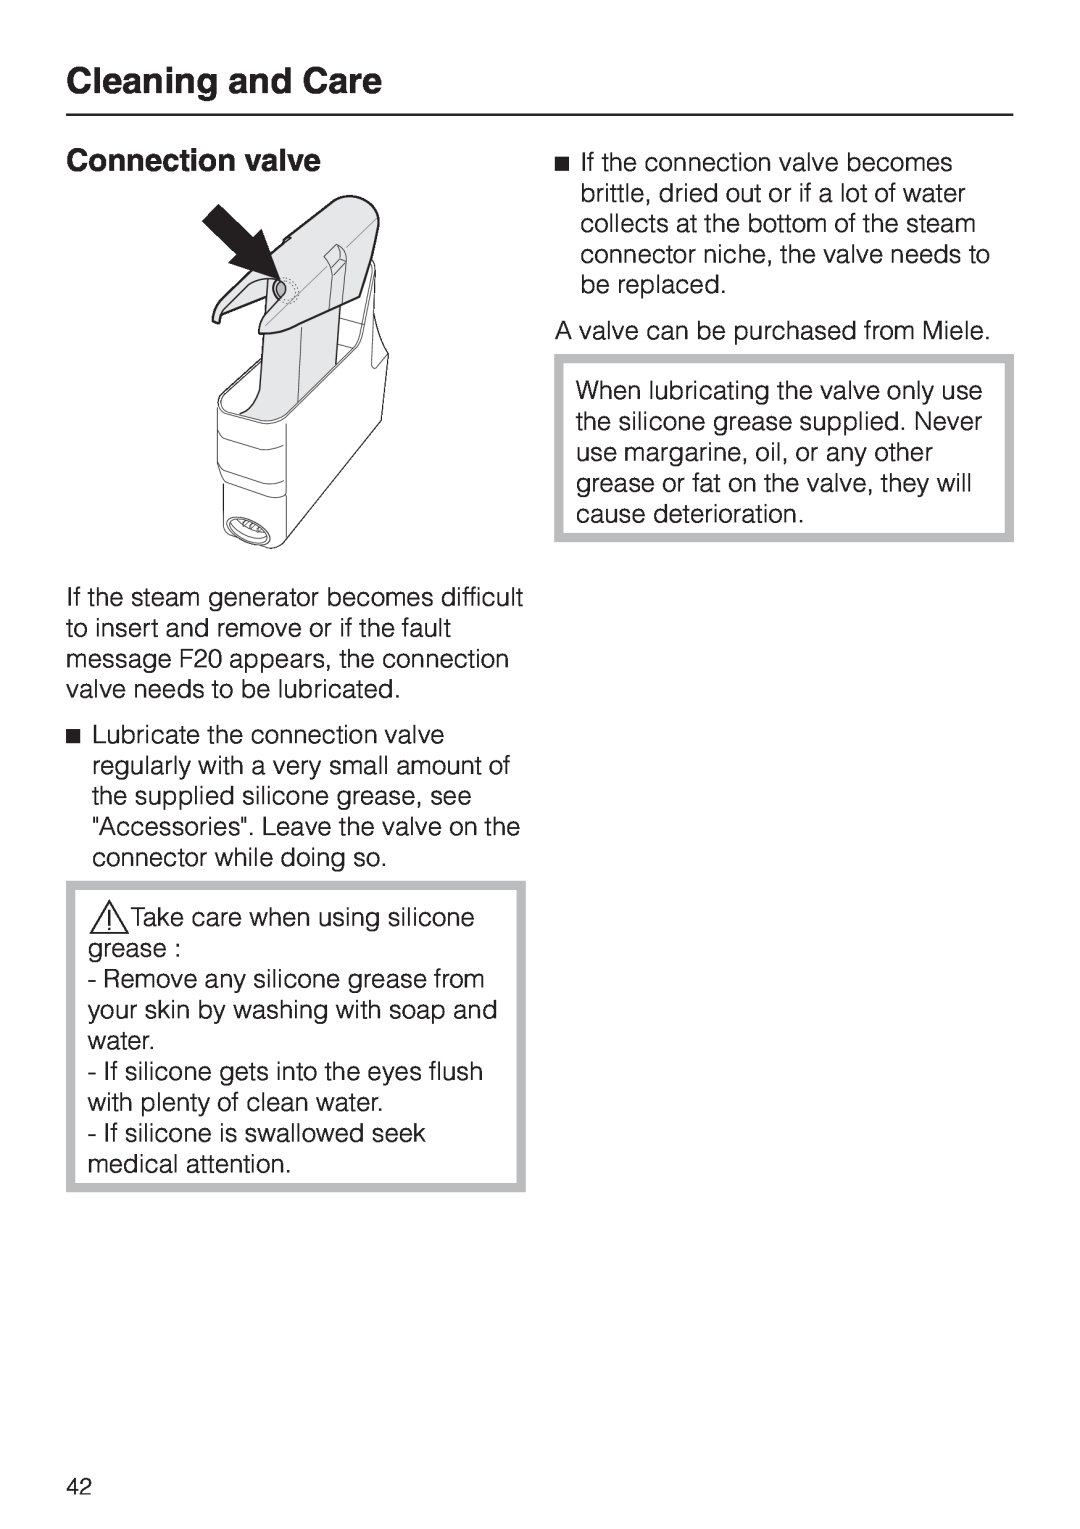 Miele DG 2661 installation instructions Connection valve, Cleaning and Care 